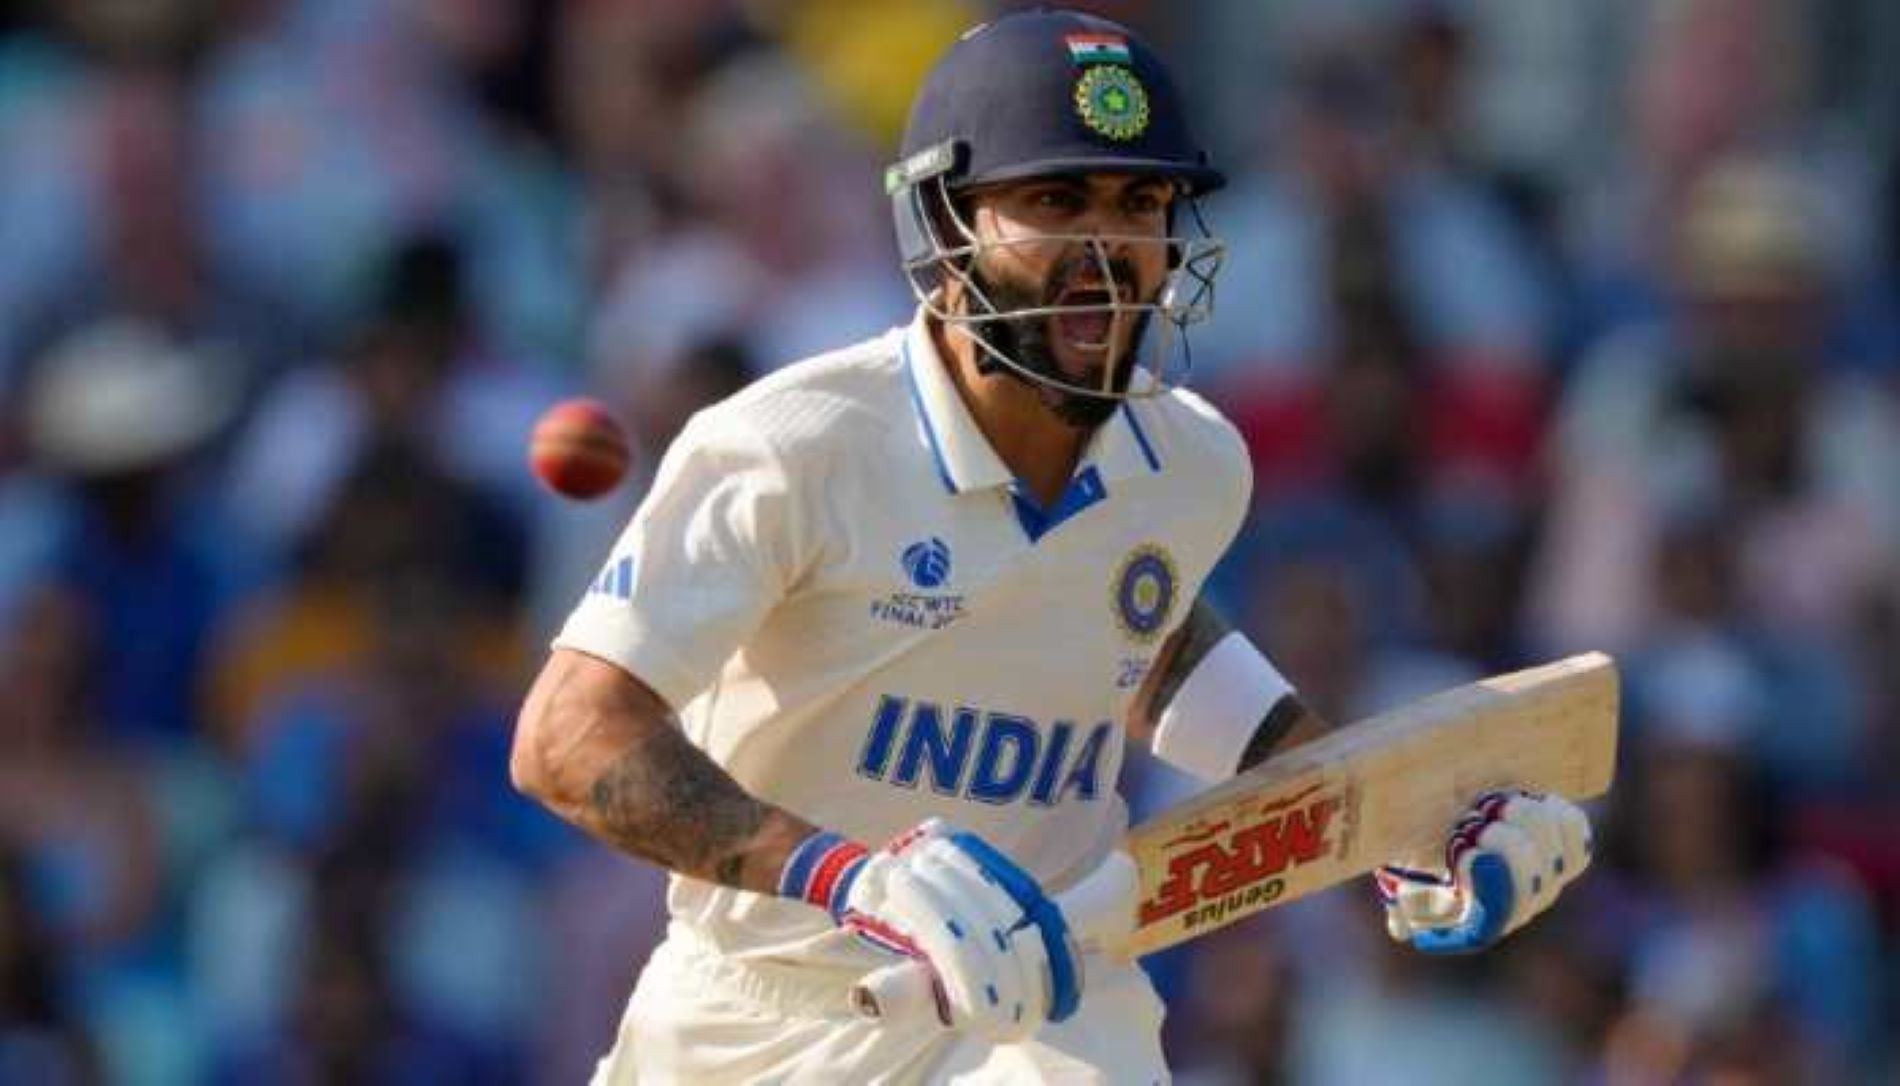 Virat Kohli scored a valuable 76 in the first Test at Dominica